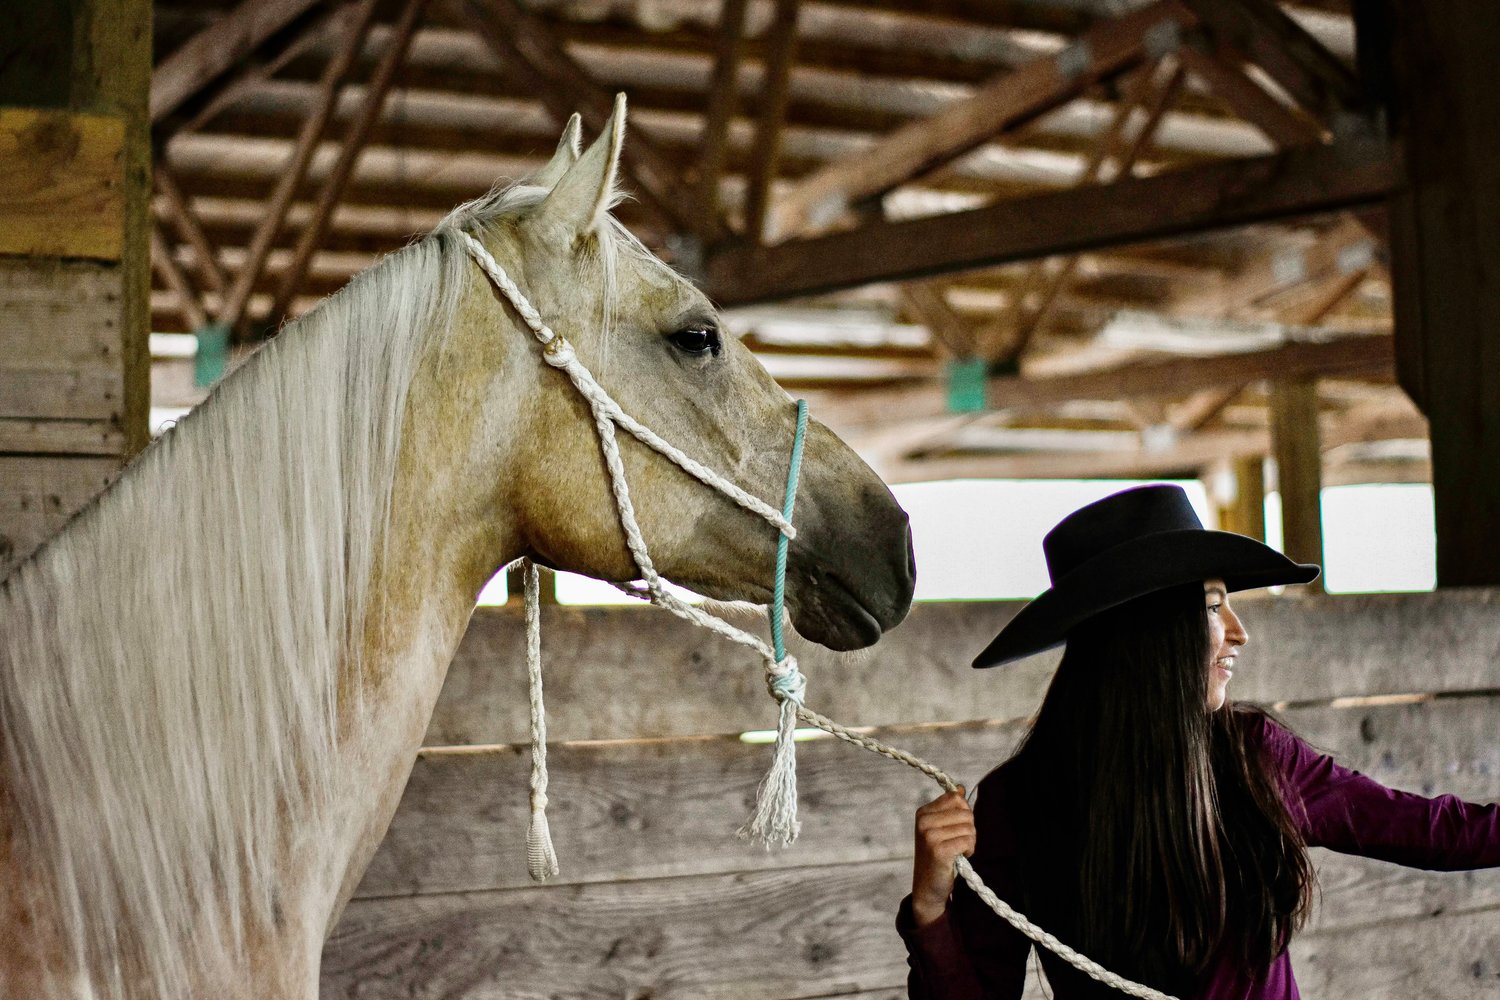 Hailey Saeman, 16, is pictured with her horse Lemon.